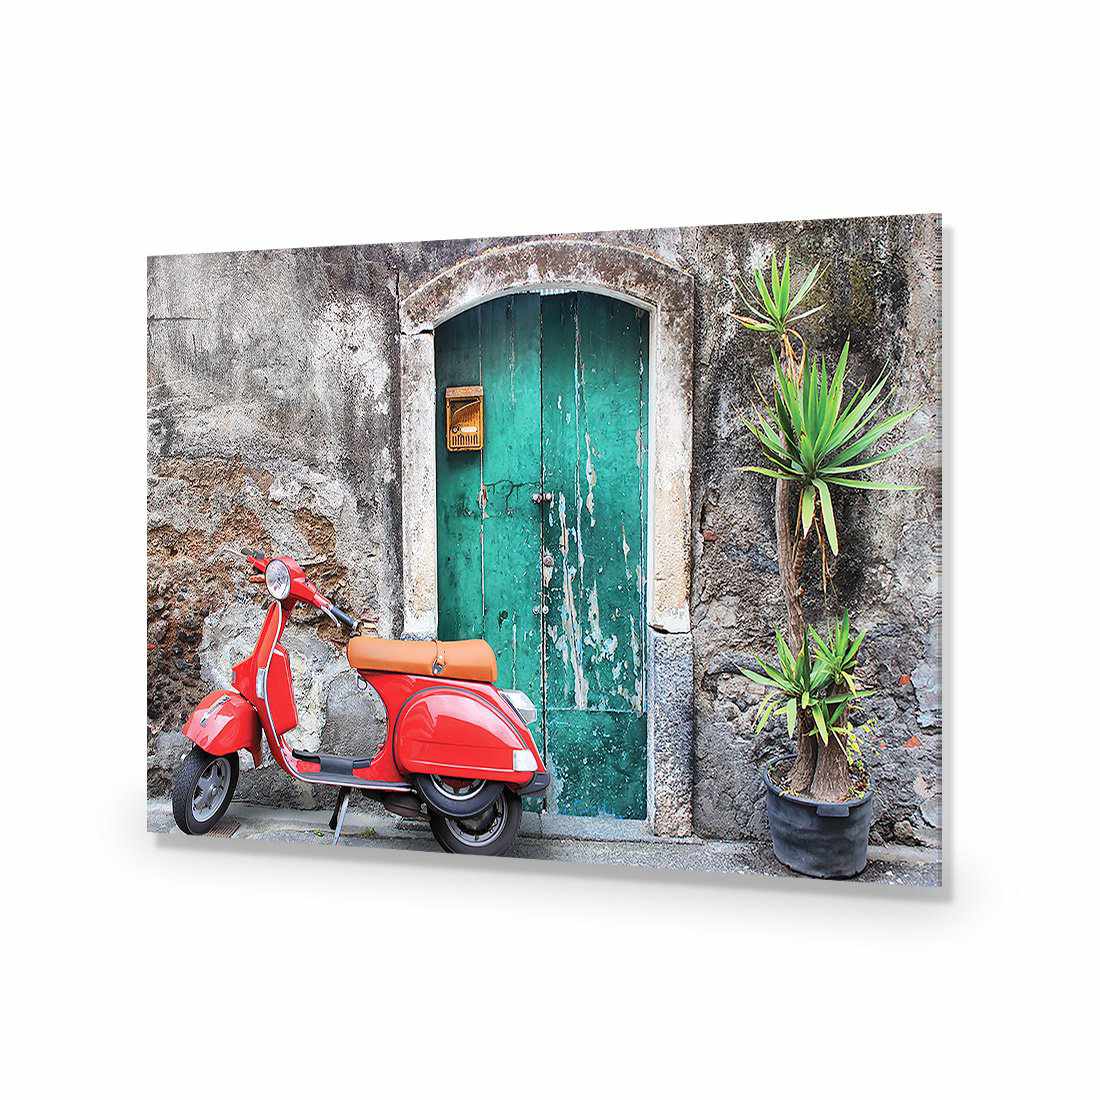 Vintage Door And Scooter-Acrylic-Wall Art Design-Without Border-Acrylic - No Frame-45x30cm-Wall Art Designs